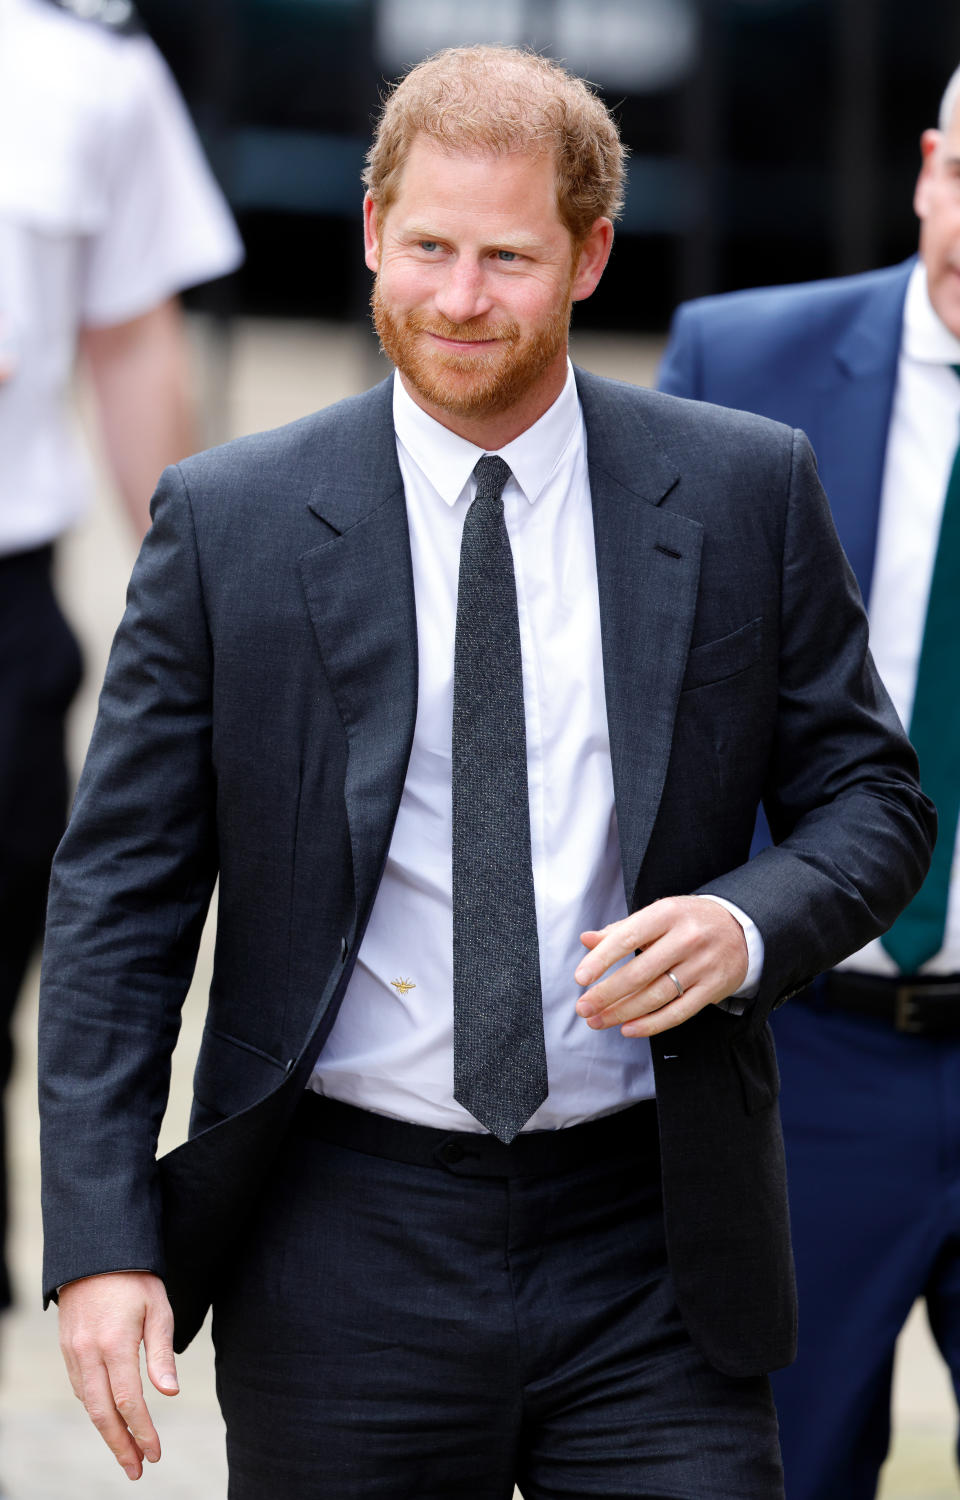 LONDON, UNITED KINGDOM - MARCH 30: (EMBARGOED FOR PUBLICATION IN UK NEWSPAPERS UNTIL 24 HOURS AFTER CREATE DATE AND TIME) Prince Harry, Duke of Sussex arrives at the Royal Courts of Justice on March 30, 2023 in London, England. Prince Harry is one of several claimants in a lawsuit against Associated Newspapers, publisher of the Daily Mail. (Photo by Max Mumby/Indigo/Getty Images)